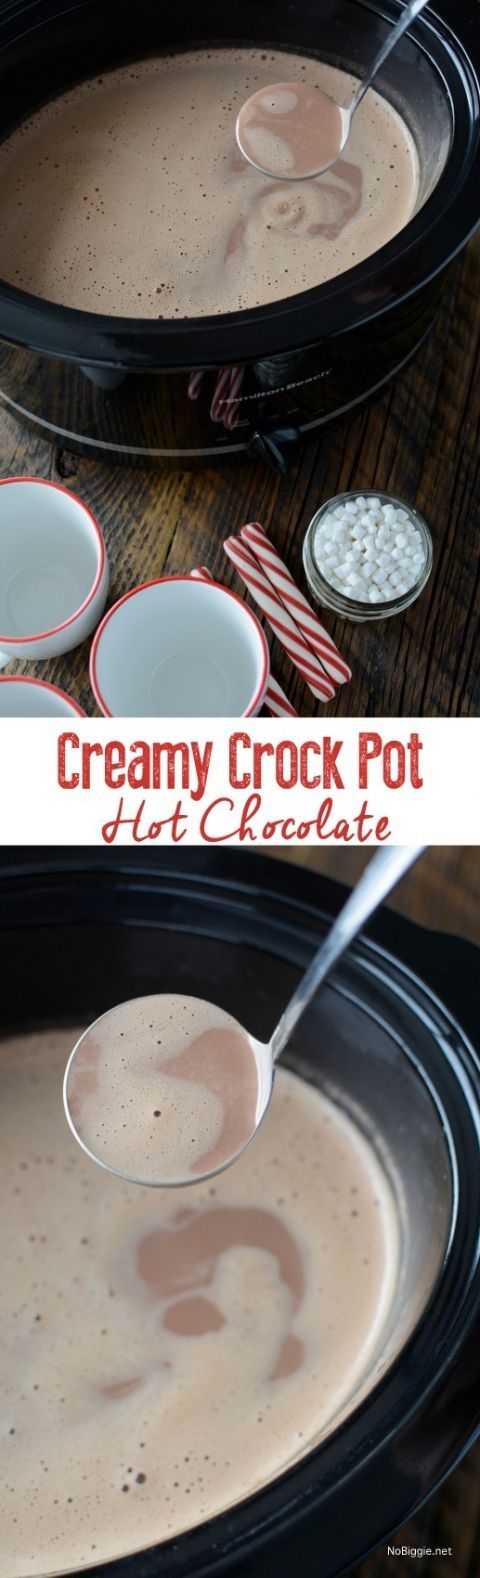 Creamy Crockpot Hot Chocolate this recipe is so easy and it feeds a crowd | NoBigg